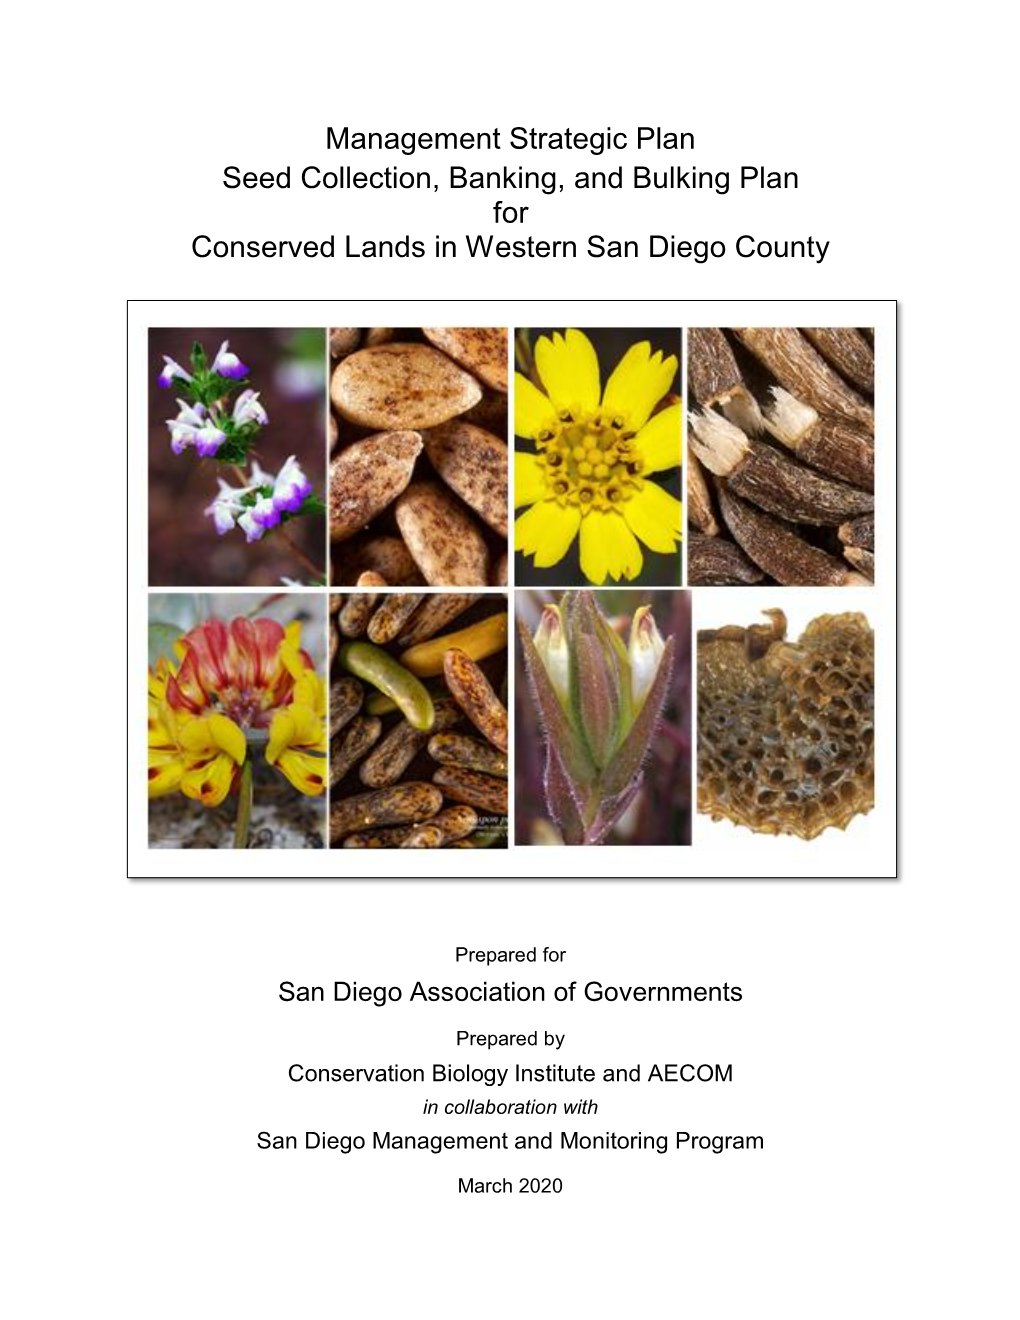 Management Strategic Plan Seed Collection, Banking, and Bulking Plan for Conserved Lands in Western San Diego County